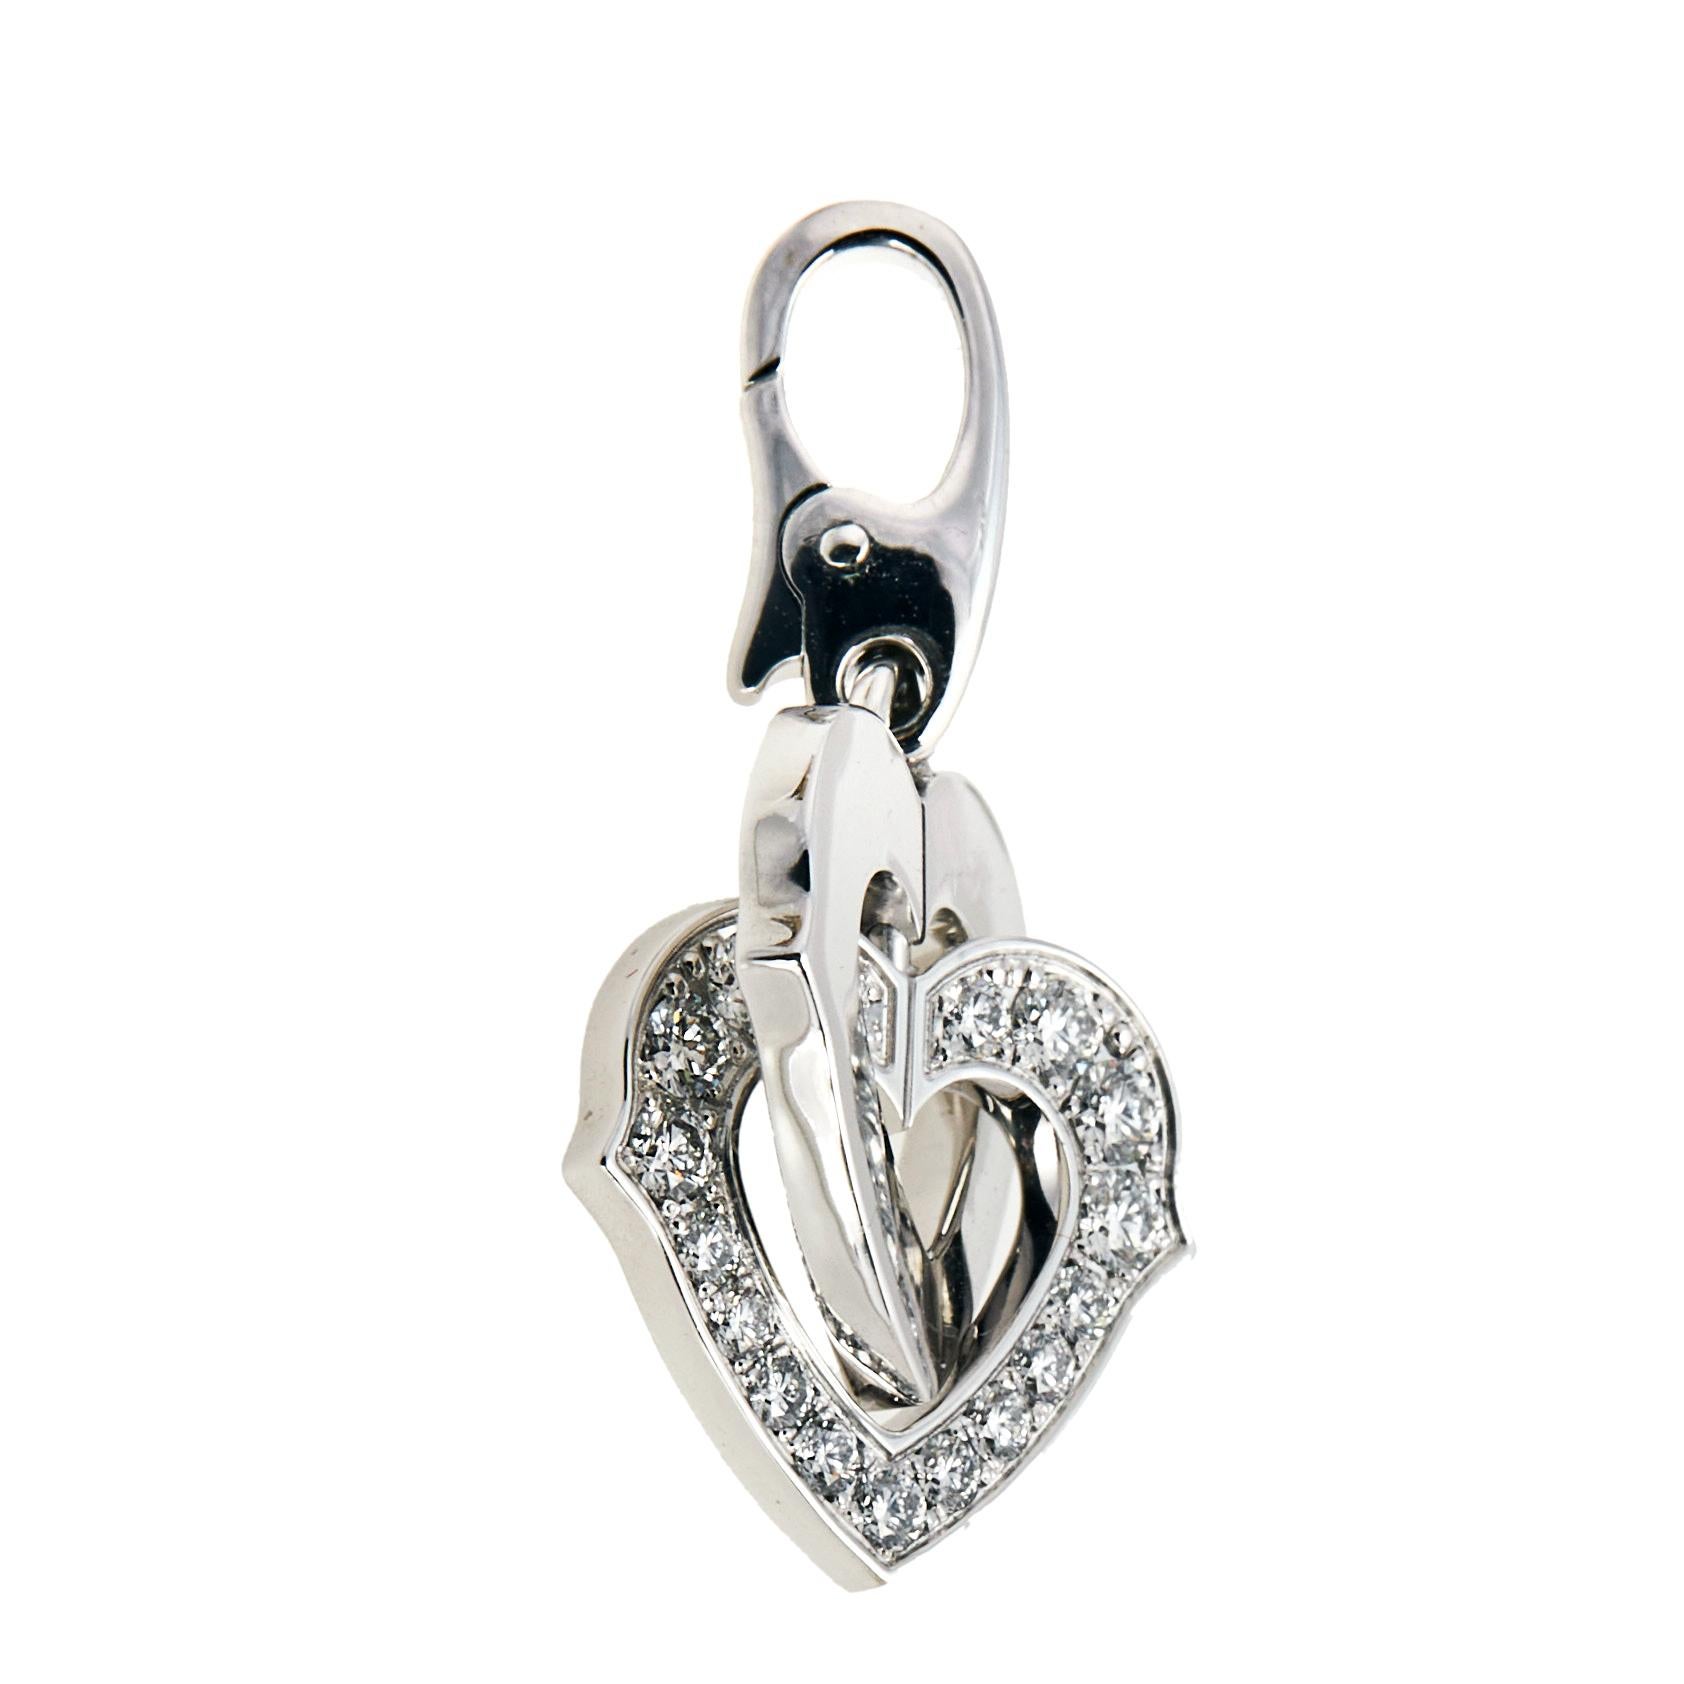 Show your love for elegant, feminine designs when you add this cute heart charm to your collection. crafted from 18K white gold, the charm features two interlocked hearts, one of which is decorated with shimmery diamonds. It is complete with a